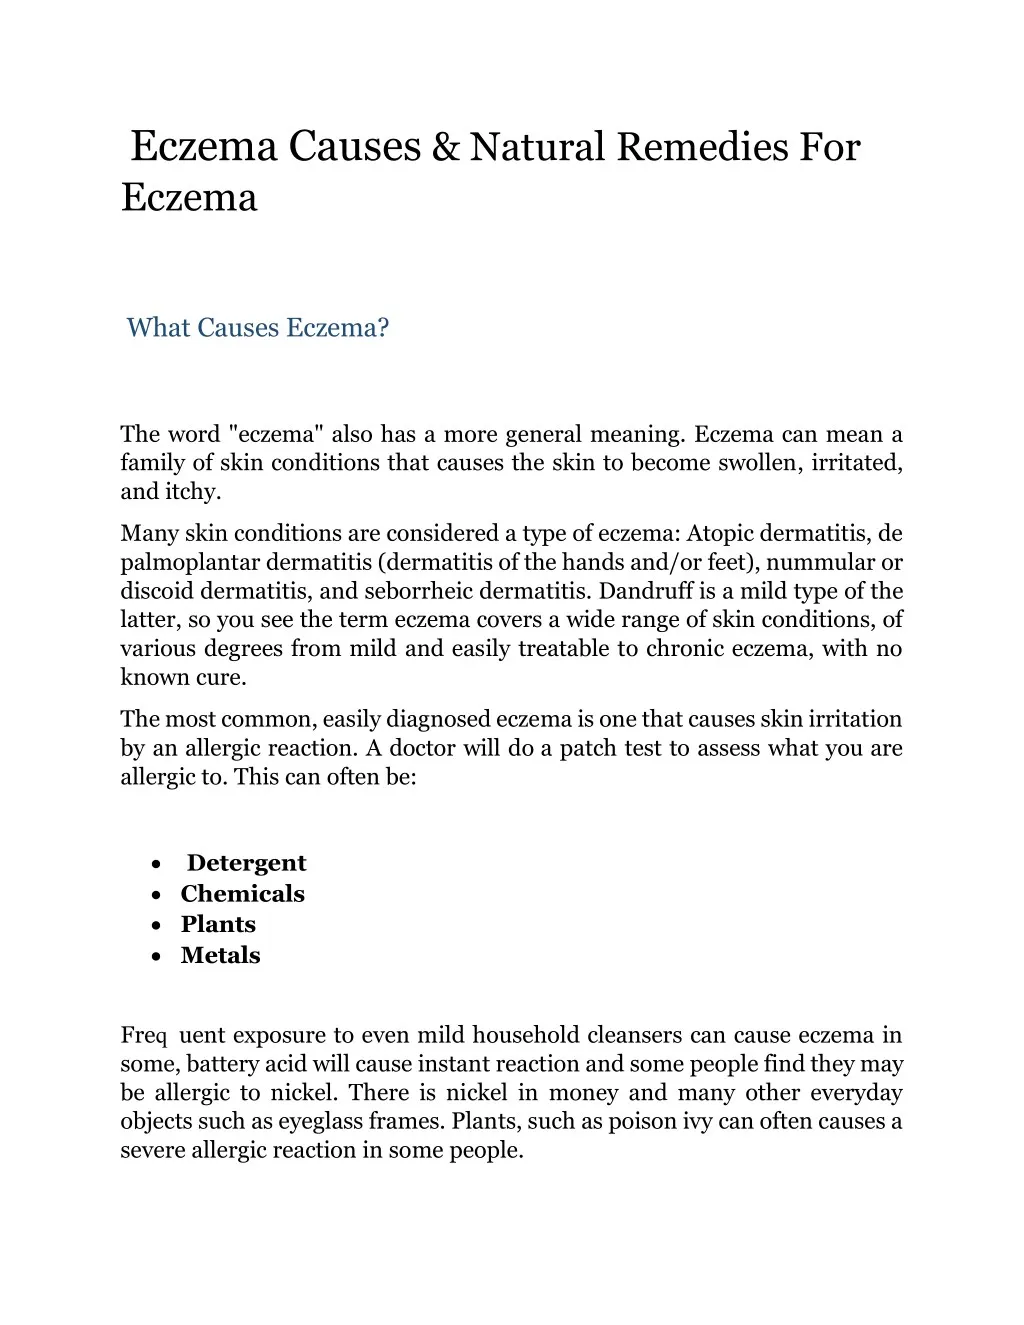 eczema causes natural remedies for eczema